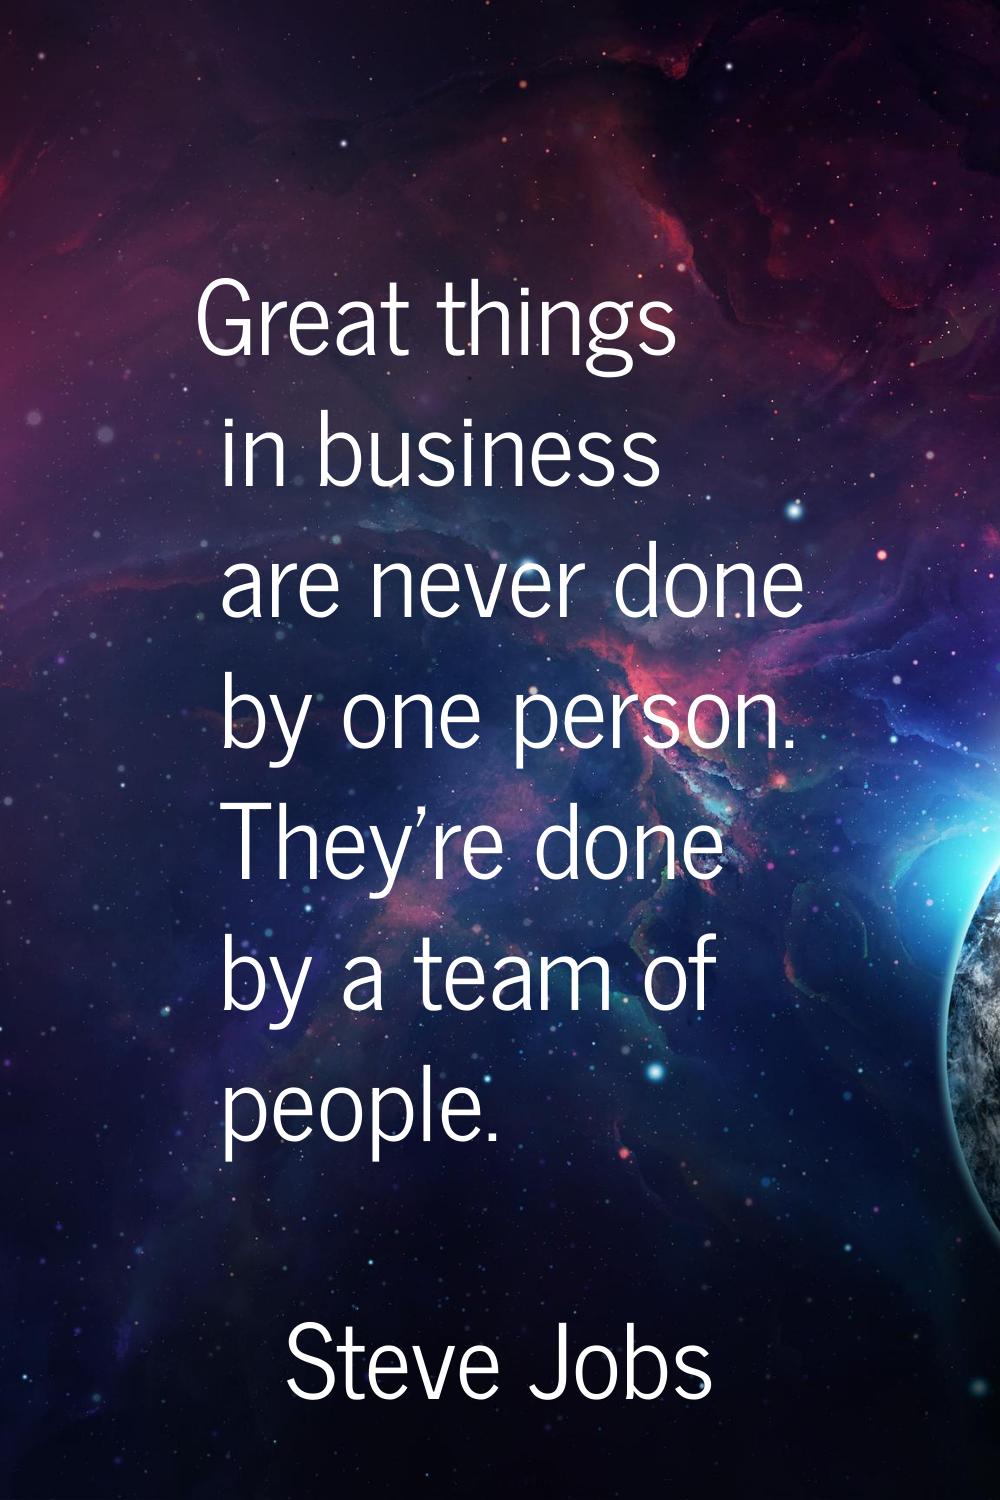 Great things in business are never done by one person. They're done by a team of people.